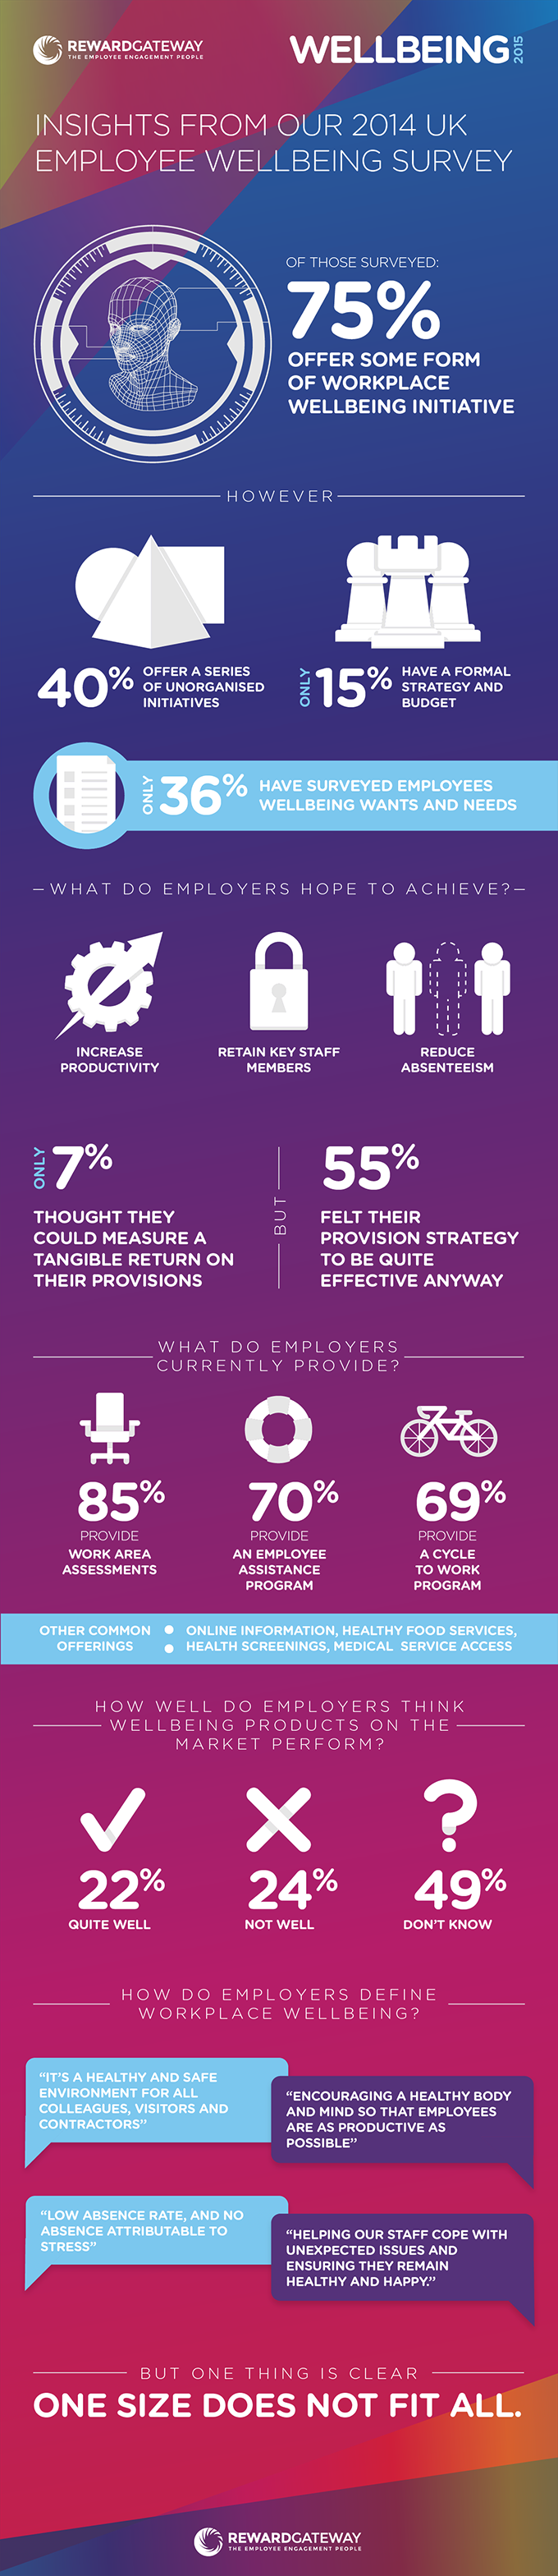 Wellbeing 2015 Survey Results Infographic